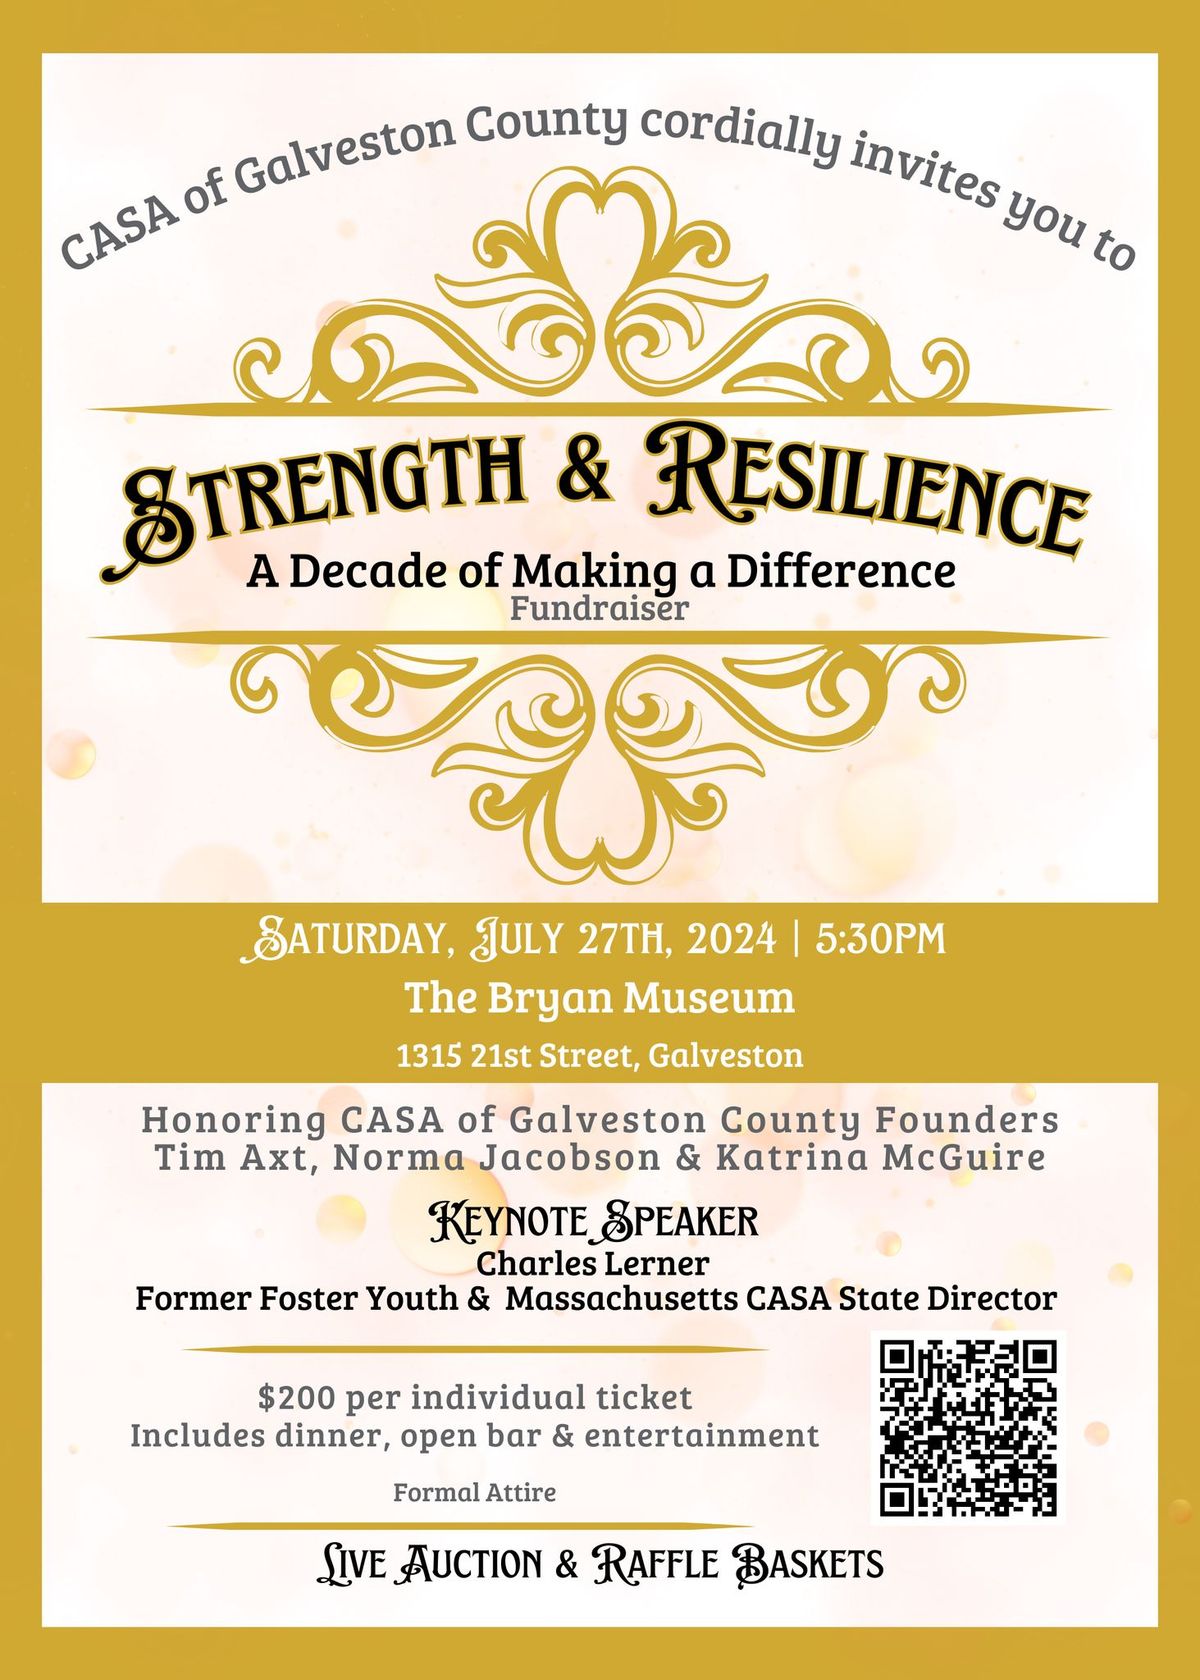 Strength & Resilience - A Decade of Making a Difference Fundraiser